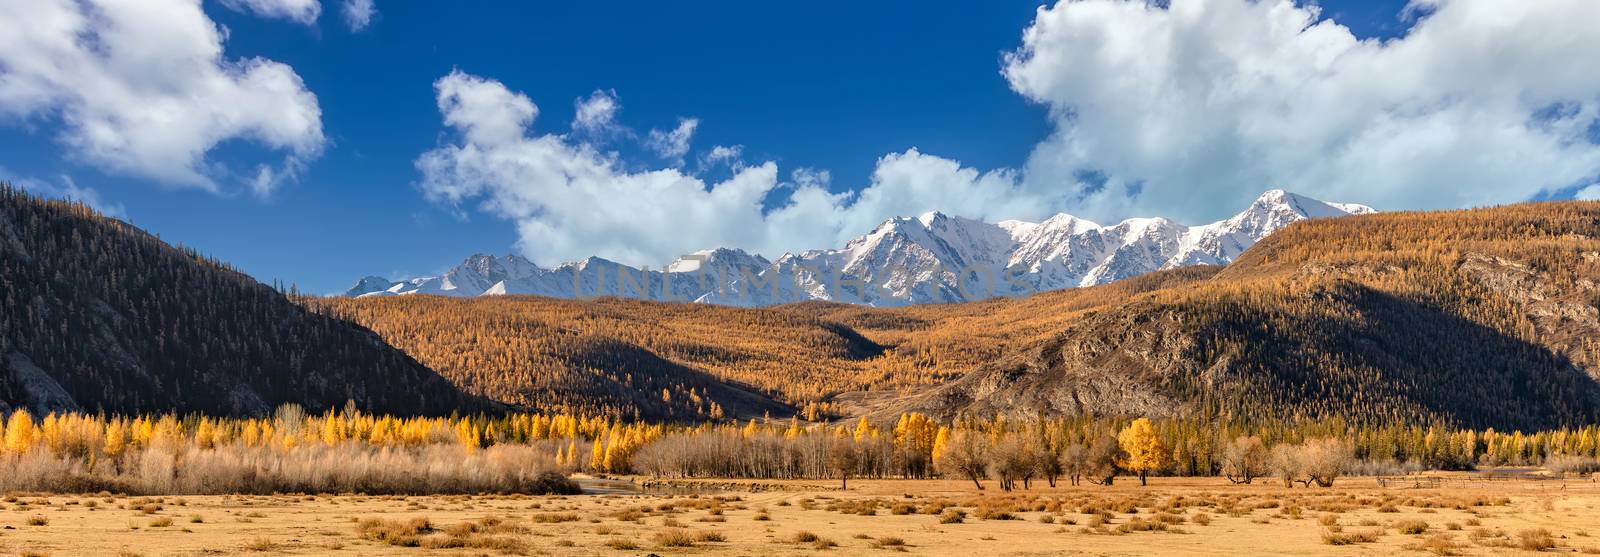 Scenic panoramic low angle view of a valley full of golden trees. Snowy mountain peaks of North Chuyskiy ridge in the background. Beautiful blue sky as a backdrop. Altai mountains, Siberia, Russia by DamantisZ